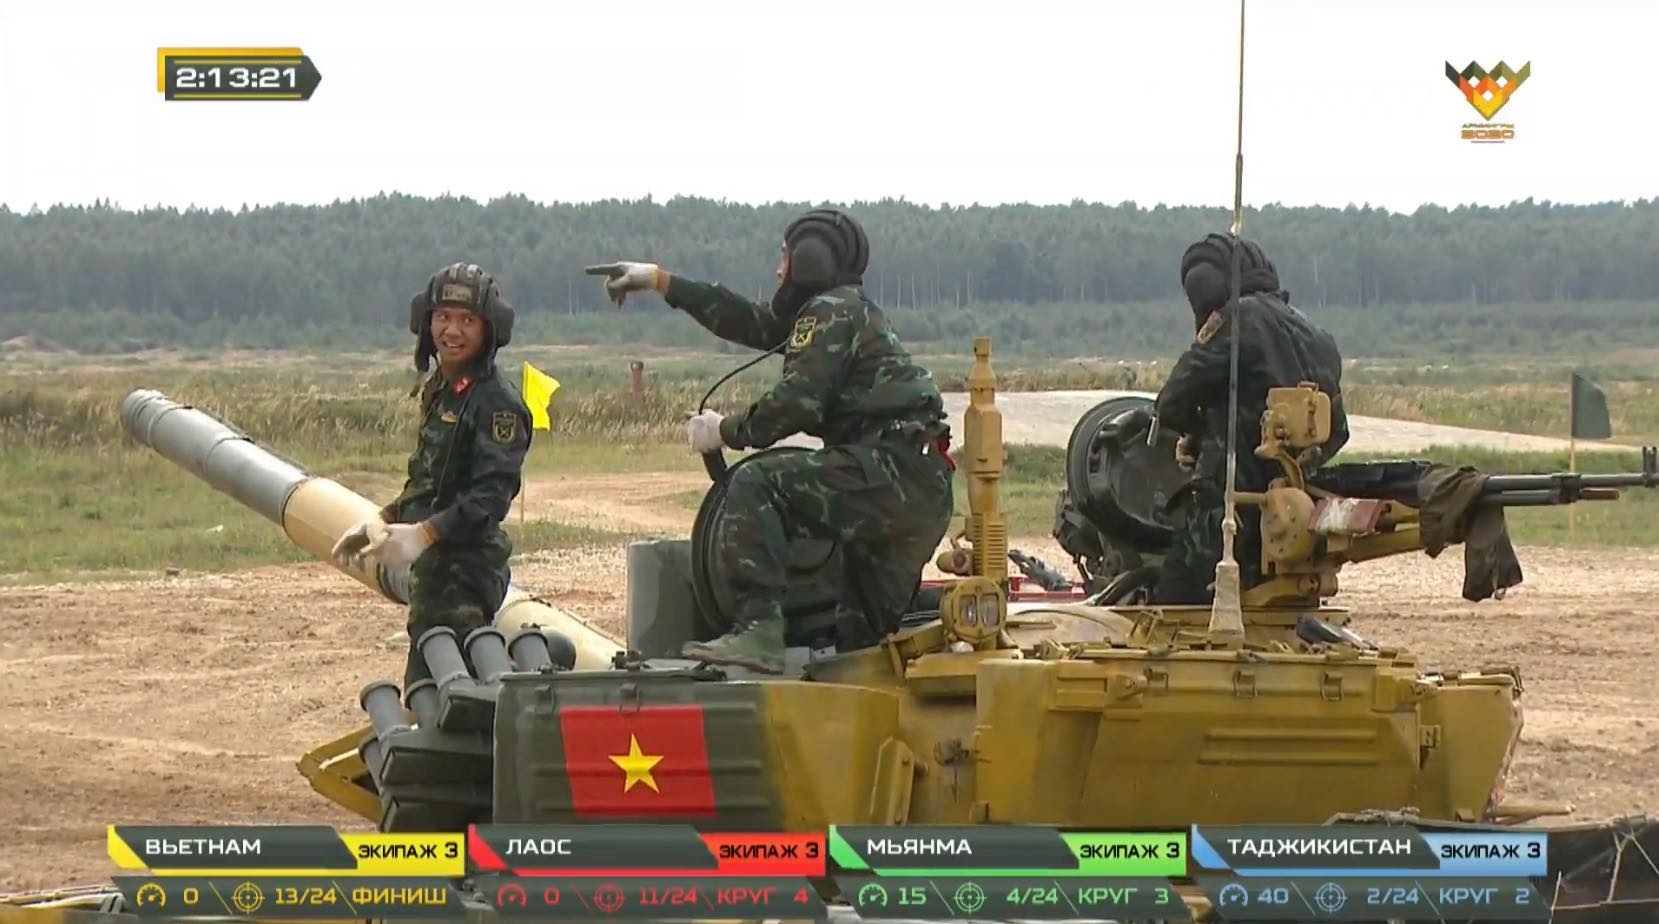 Outstanding results Vietnam teams gain at 2020 Army Games